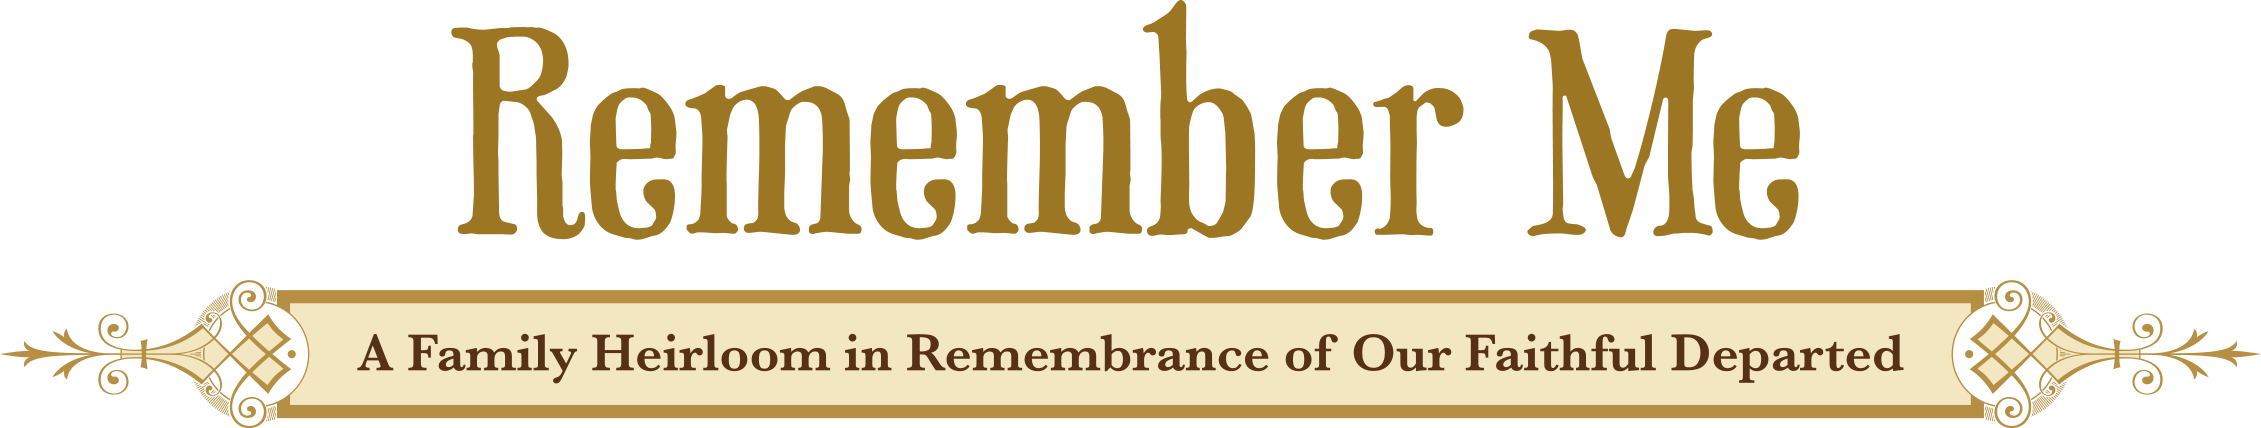 The Remembrance Book